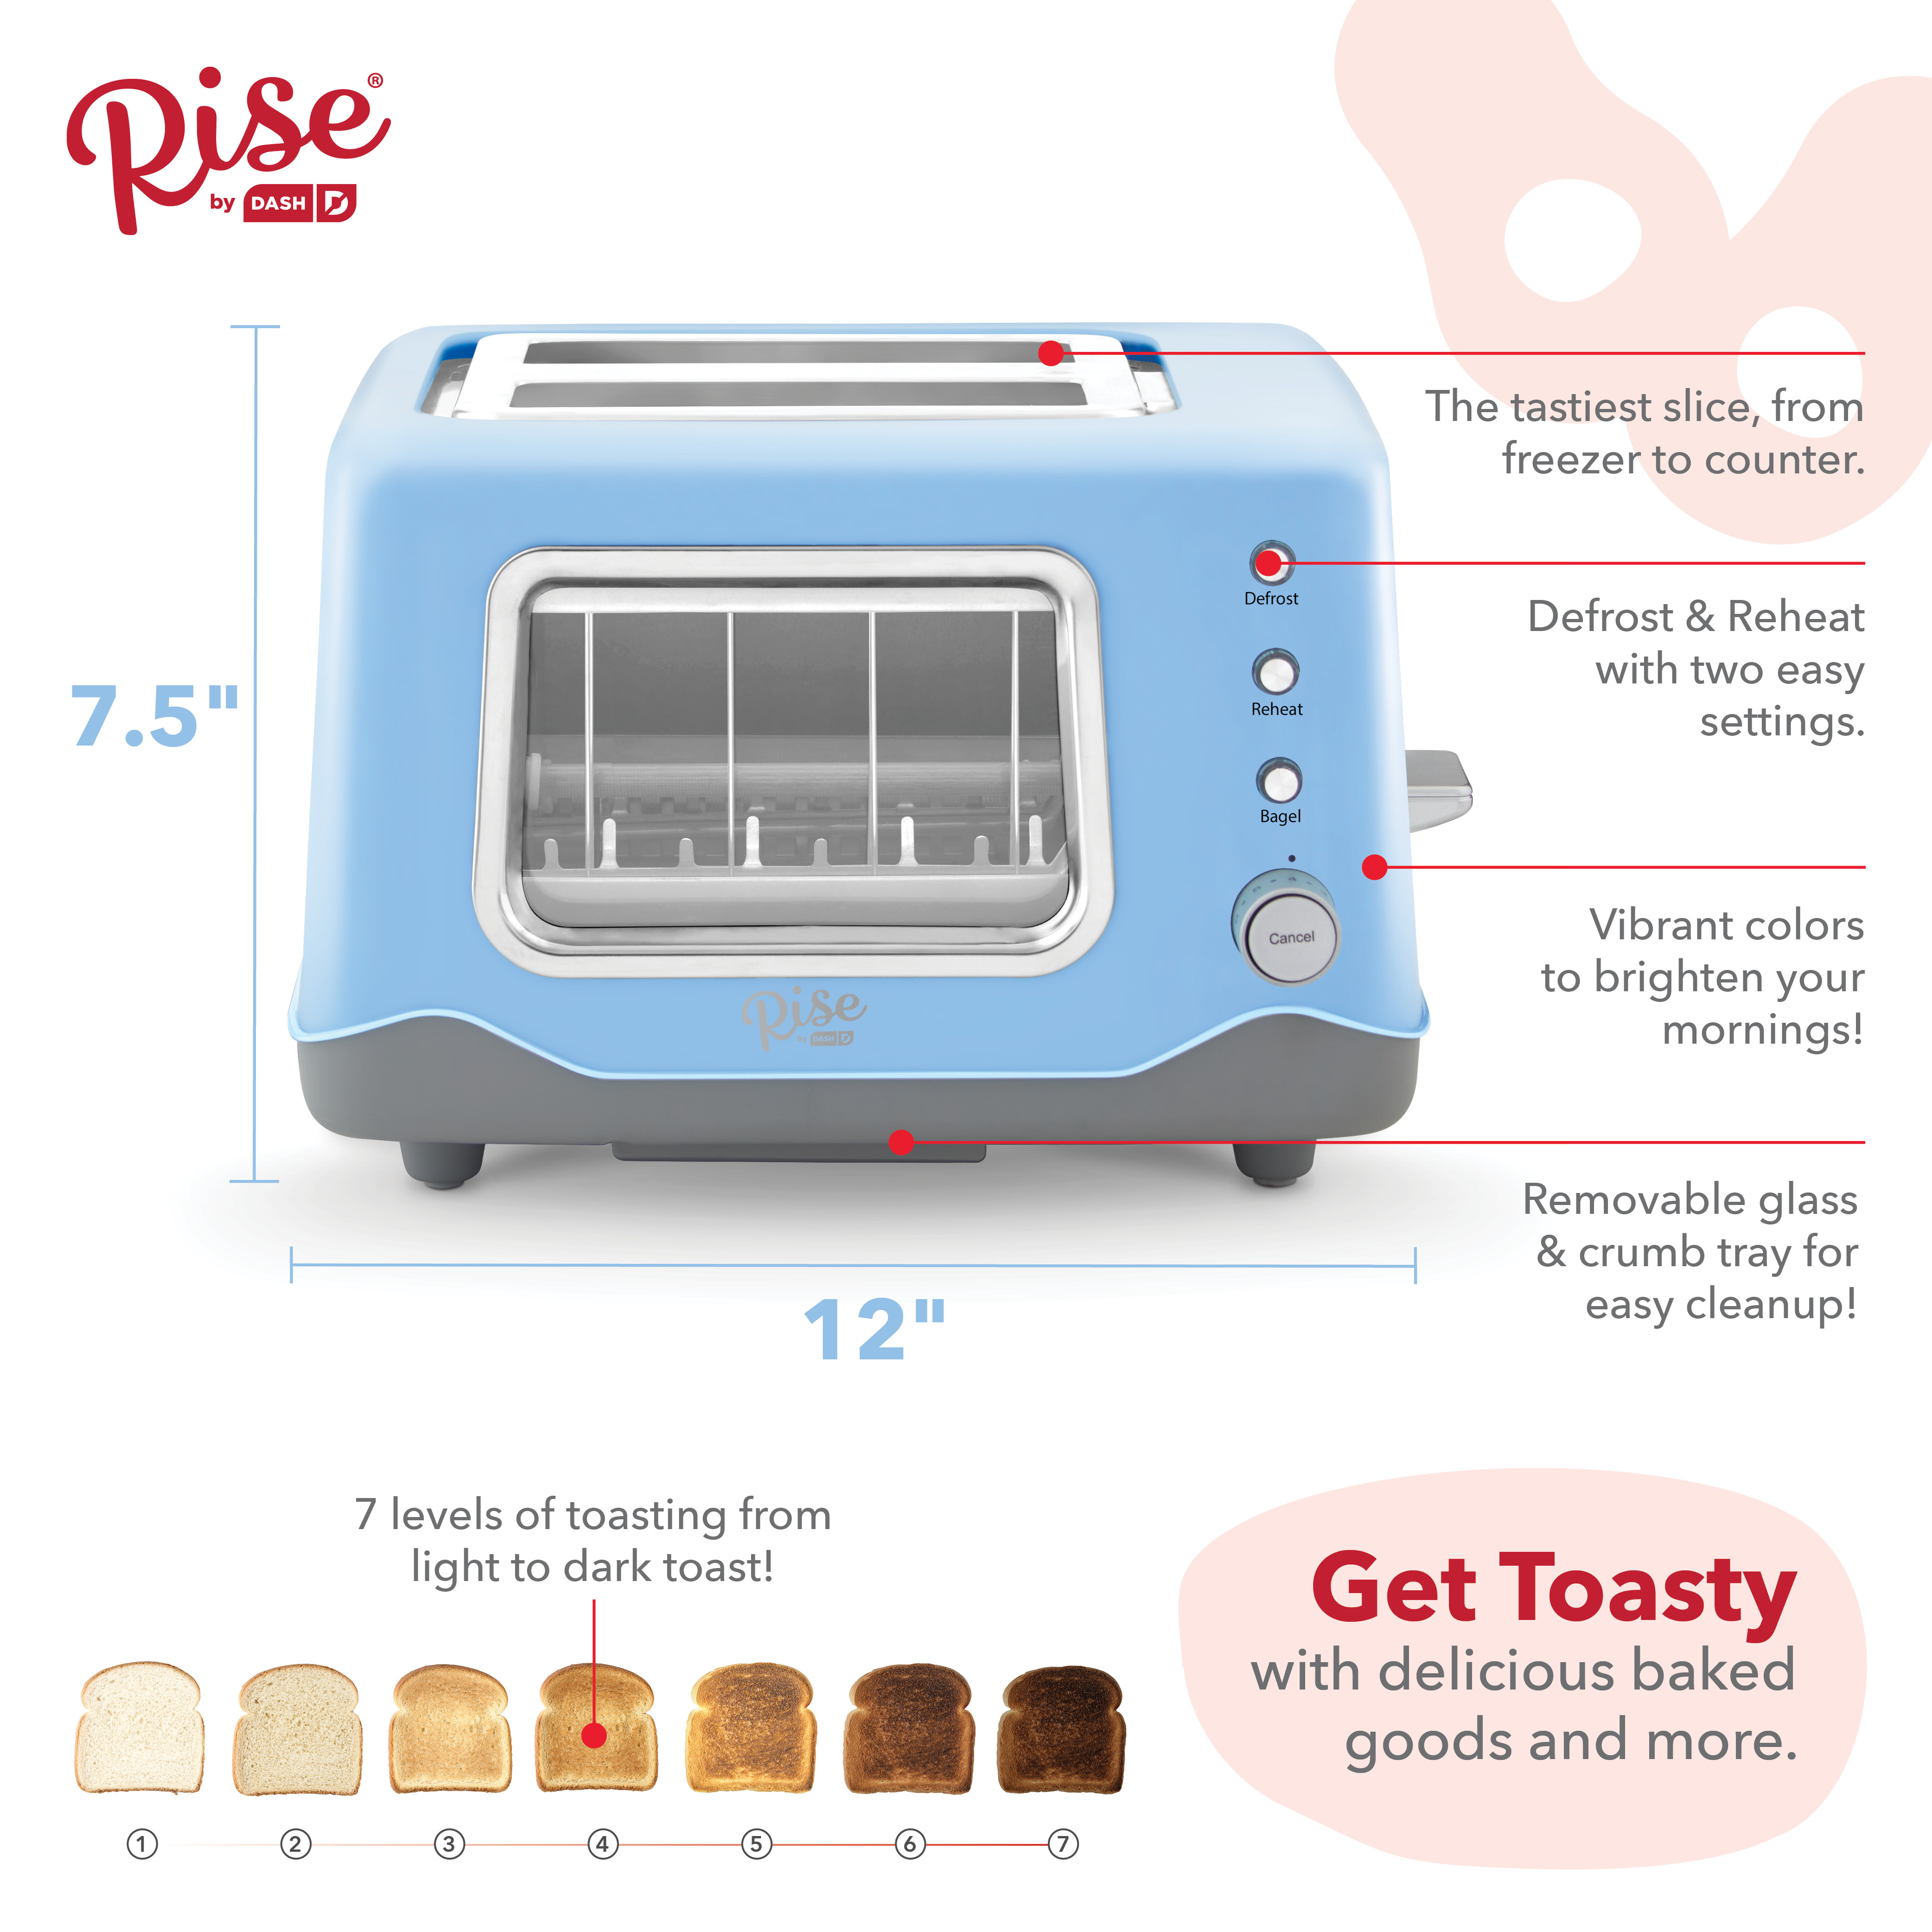 Rise by Dash Clear View Window 2-Slice Toaster Blue - Defrost, Reheat, Bagel, Auto Shut off, New - image 5 of 7